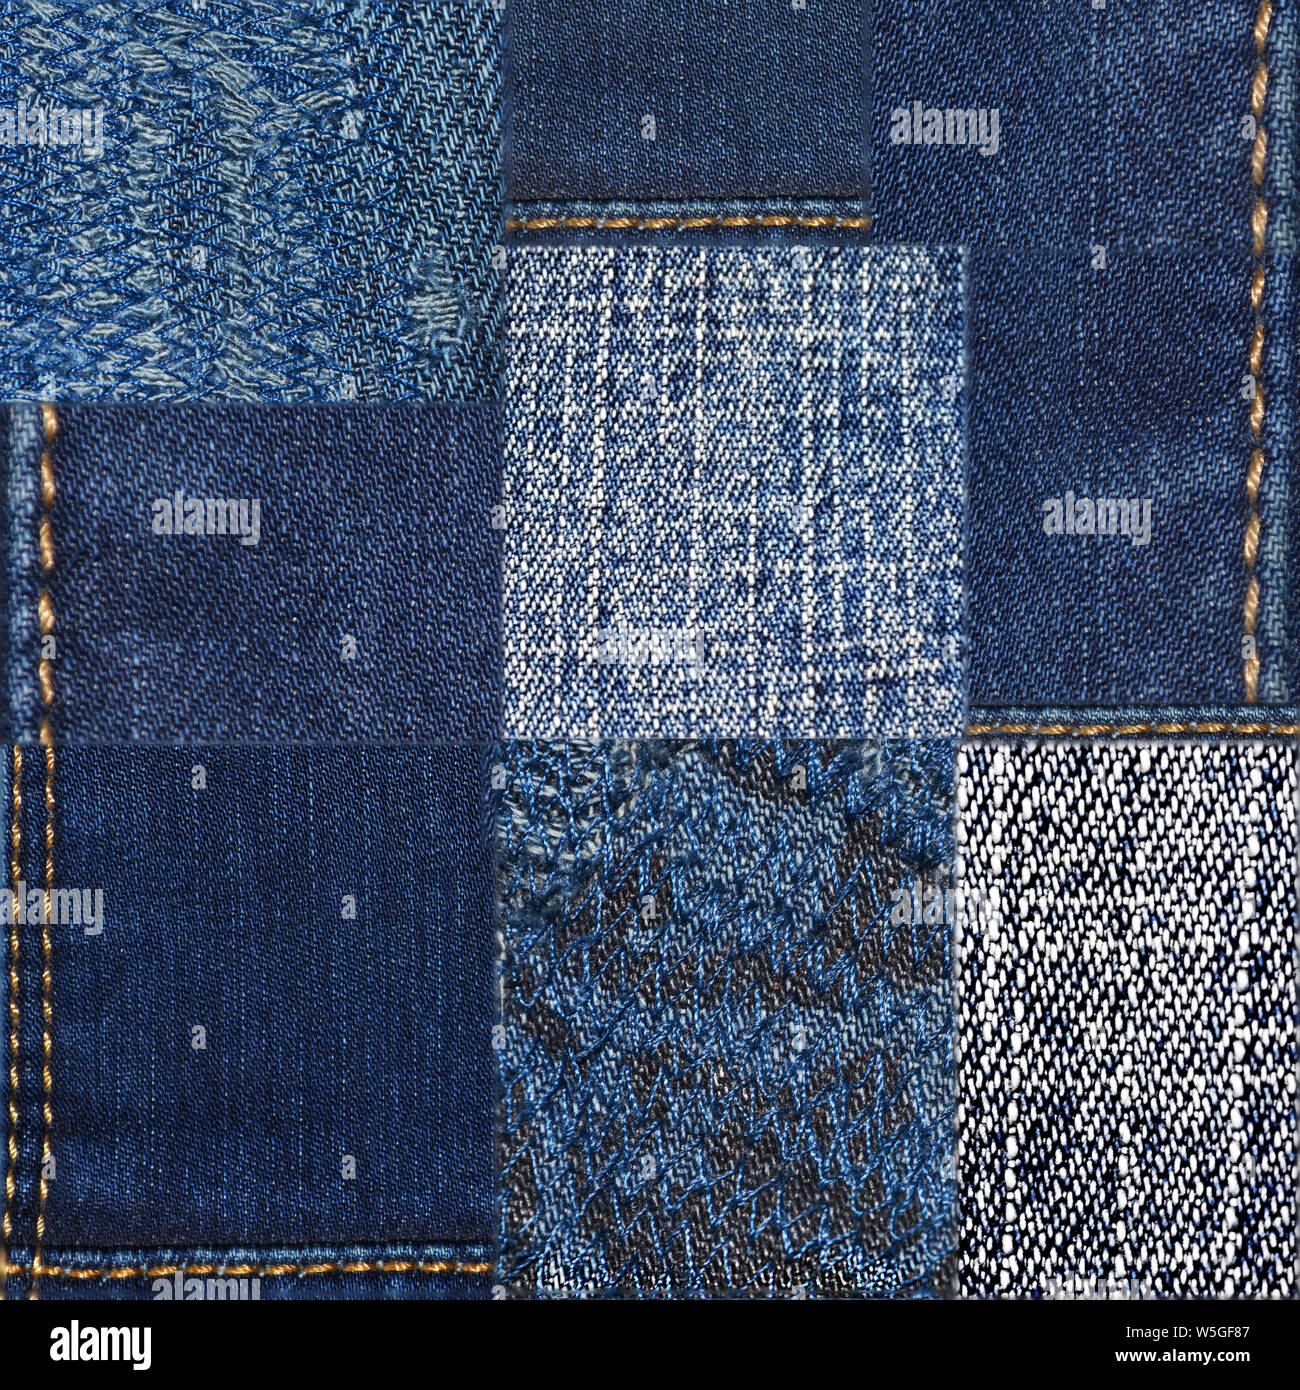 Denim Fabric High Resolution Stock Photography and Images - Alamy